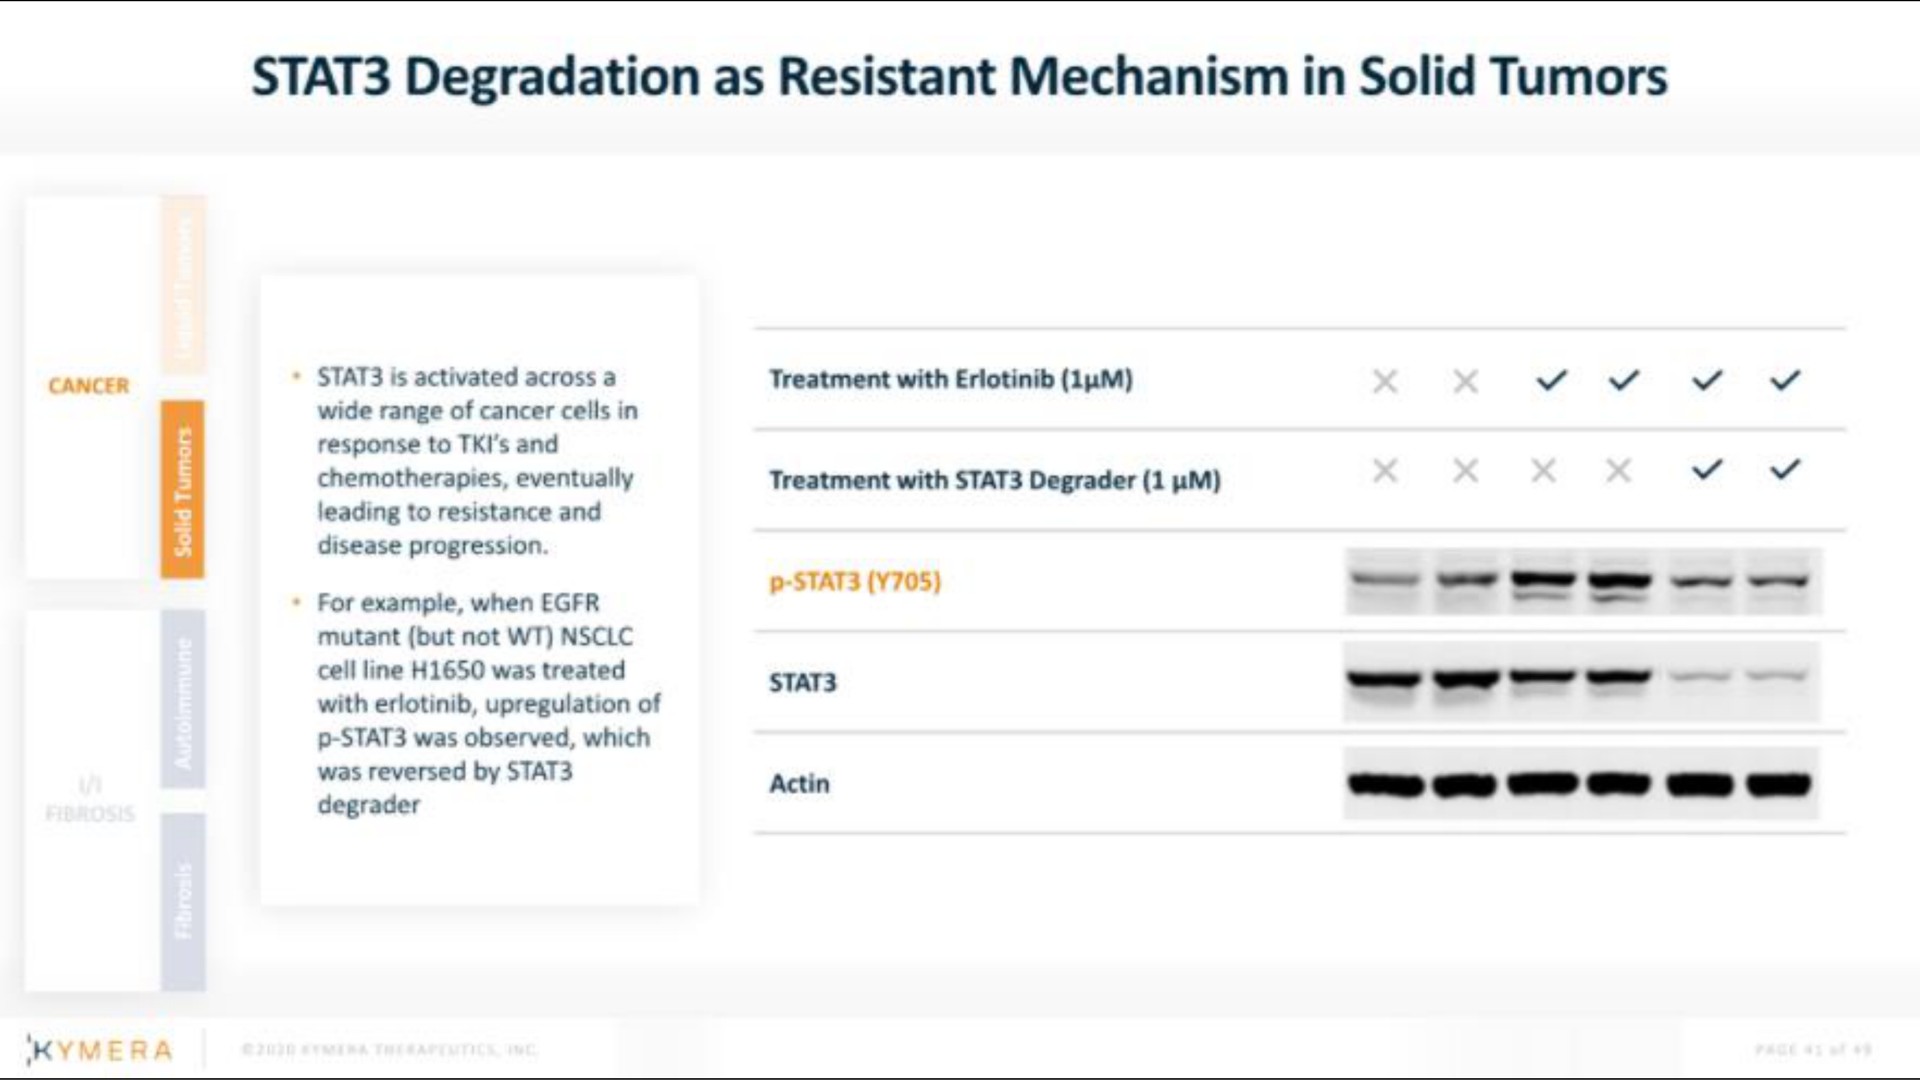 degradation as resistant mechanism in solid tumors | Kymera